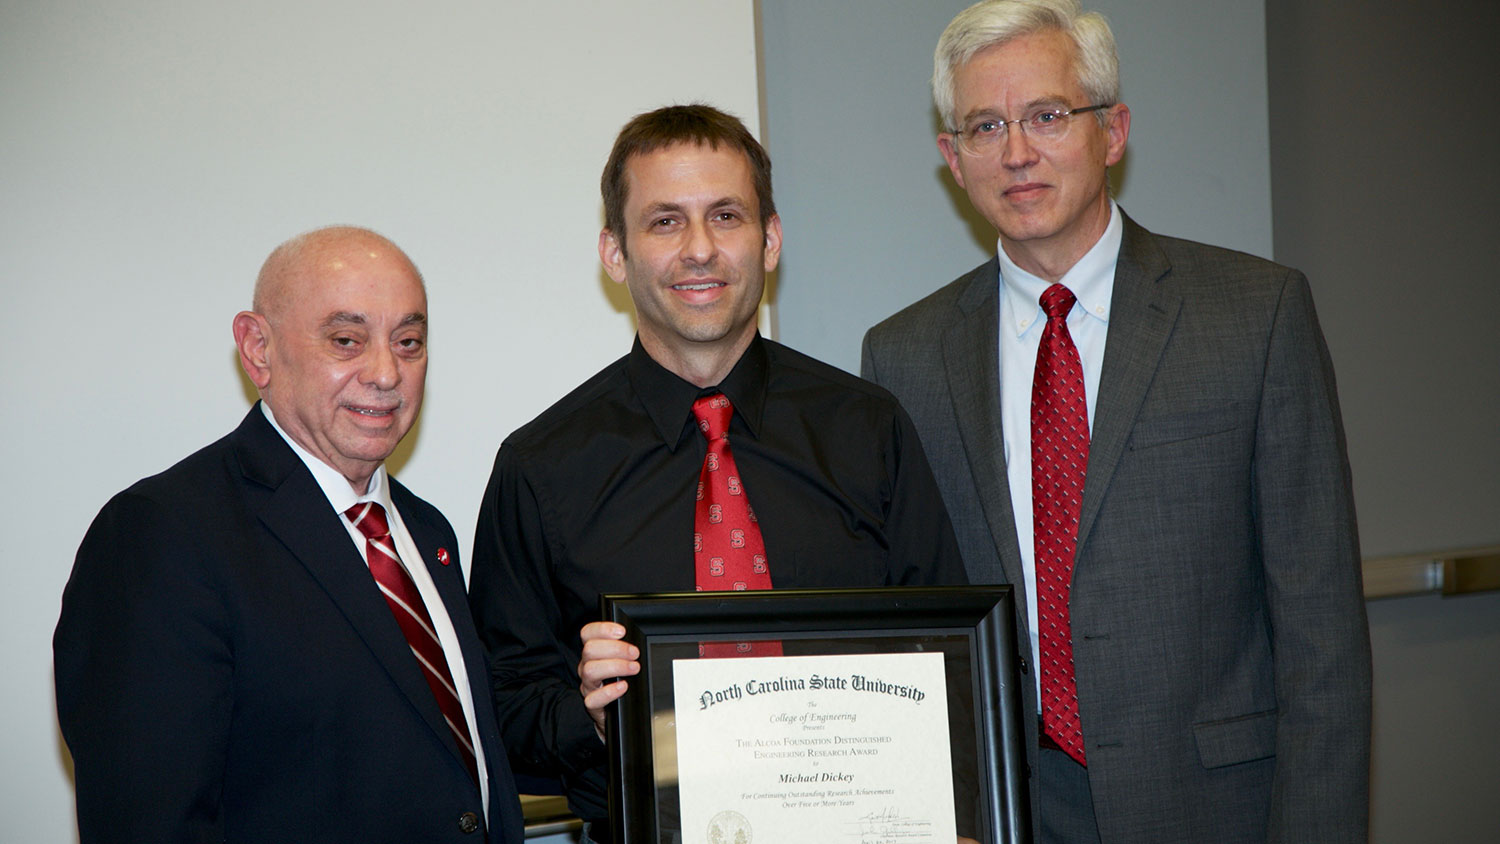 Dr. Michael Dickey, professor of chemical and biomolecular engineering, receives the Alcoa Foundation Distinguished Engineering Research Award from Dr. Louis Martin-Vega, dean of the College of Engineering, and Dr. Douglas Reeves, associate dean of graduate programs for the College.